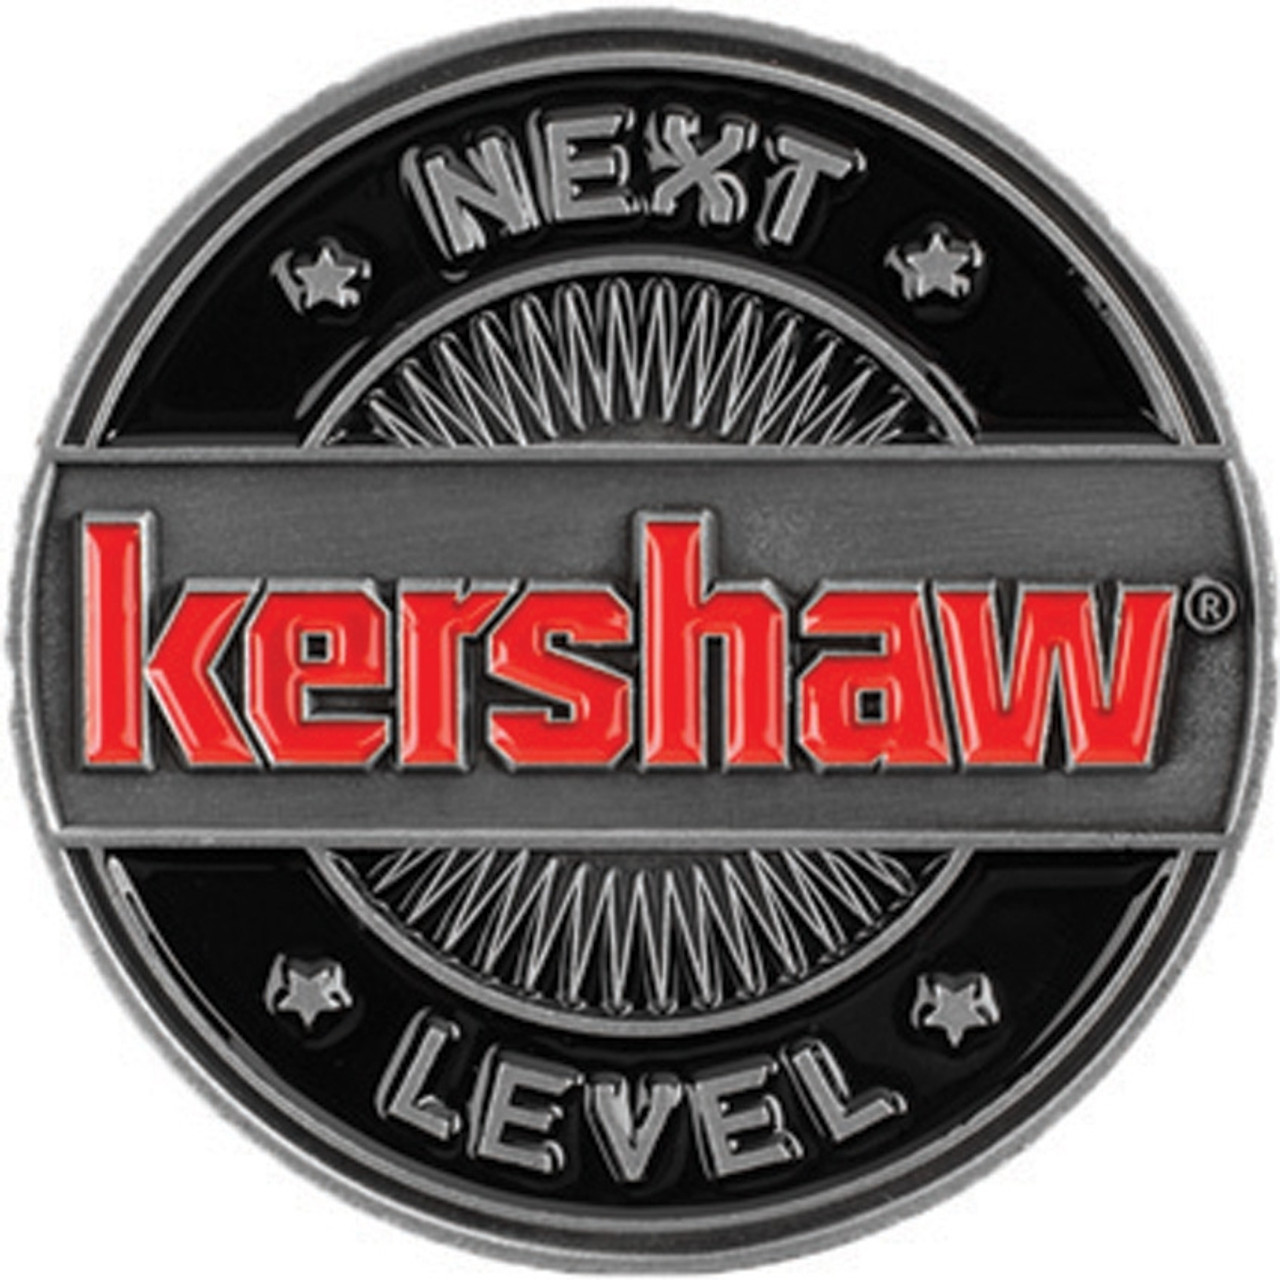 Kershaw  Challenge Coin-Next Level